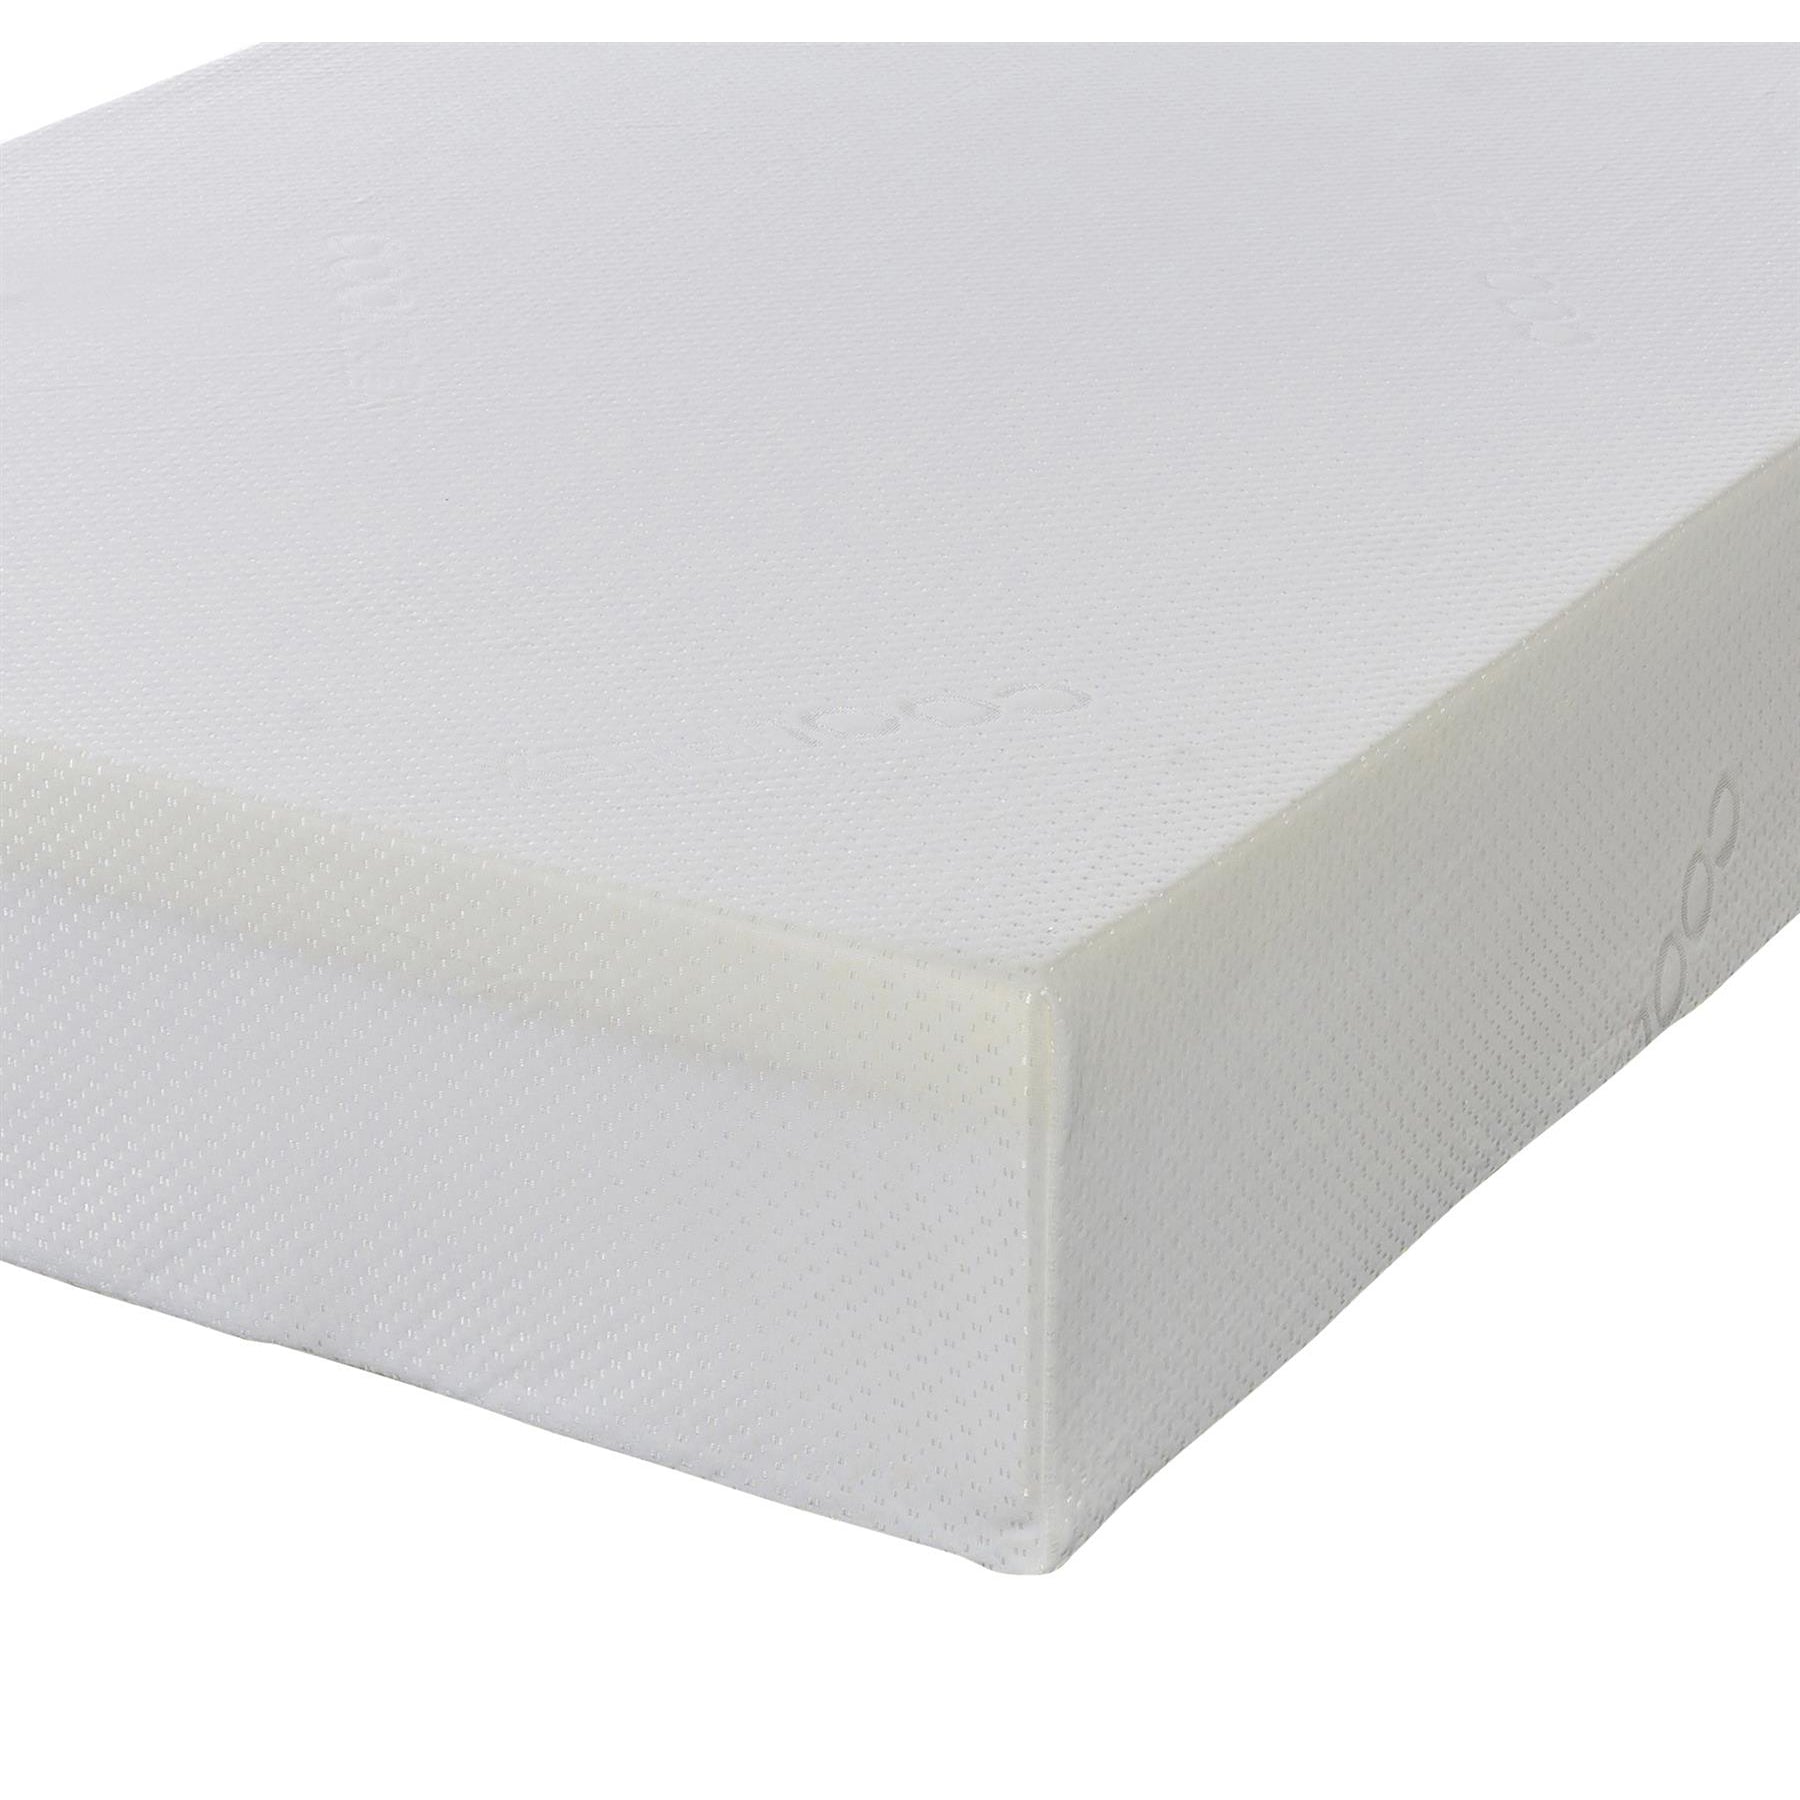 Starlight Beds™ 5" Reflex Foam Along with 1" Memory Foam Suitable for all Everyone Firm based Mattress